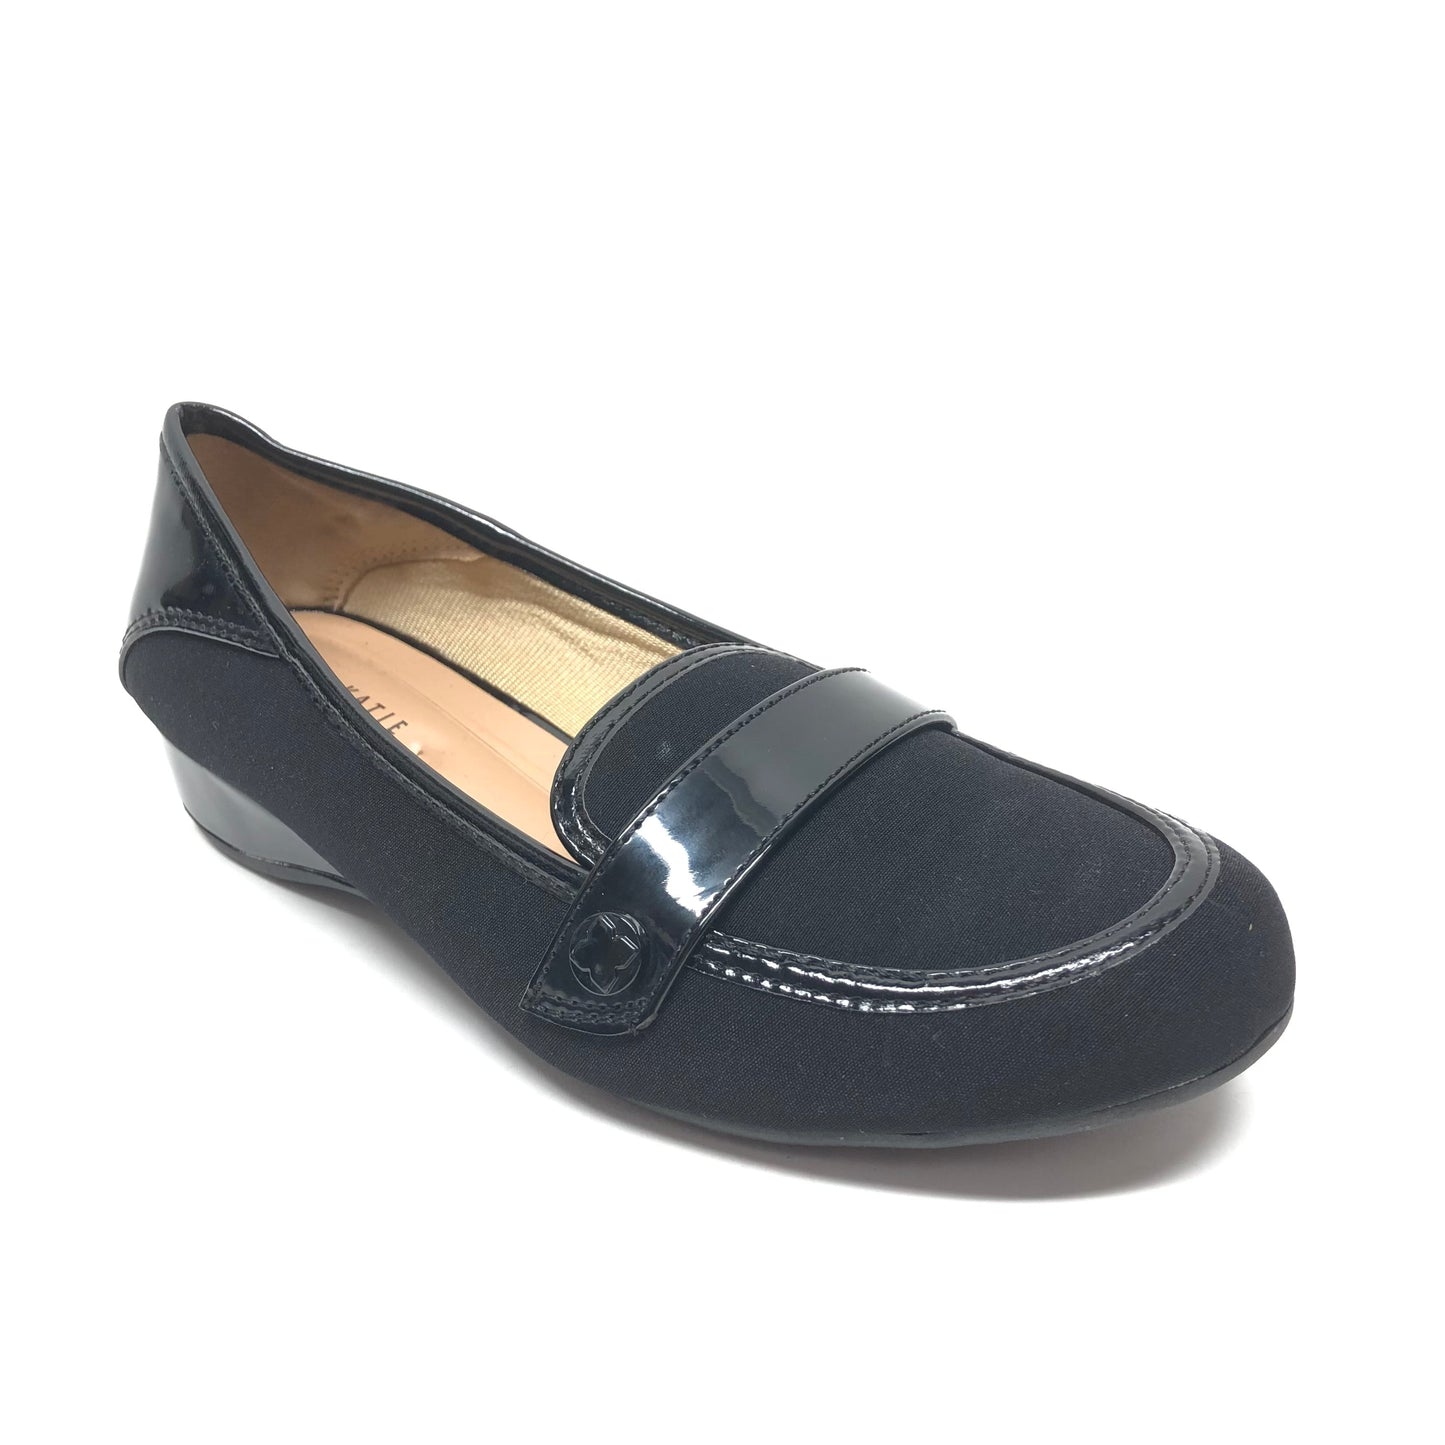 Black Shoes Flats Kelly And Katie, Size 5.5